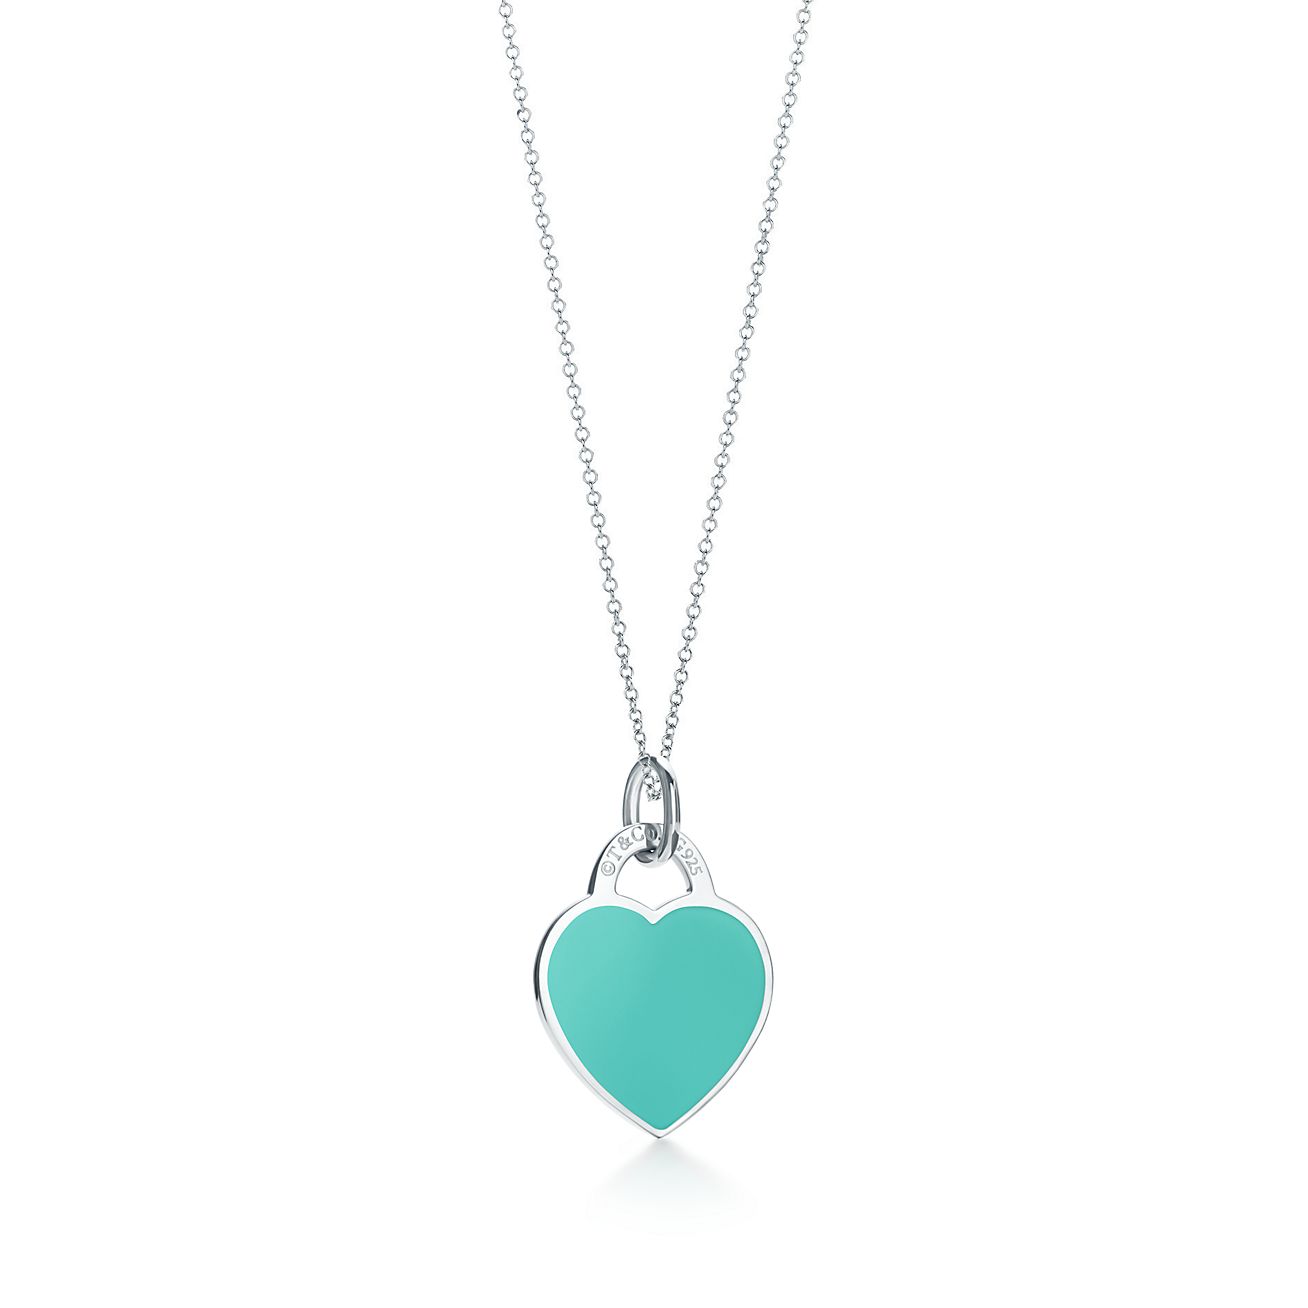 Heart Tag Charm in Silver, Small 